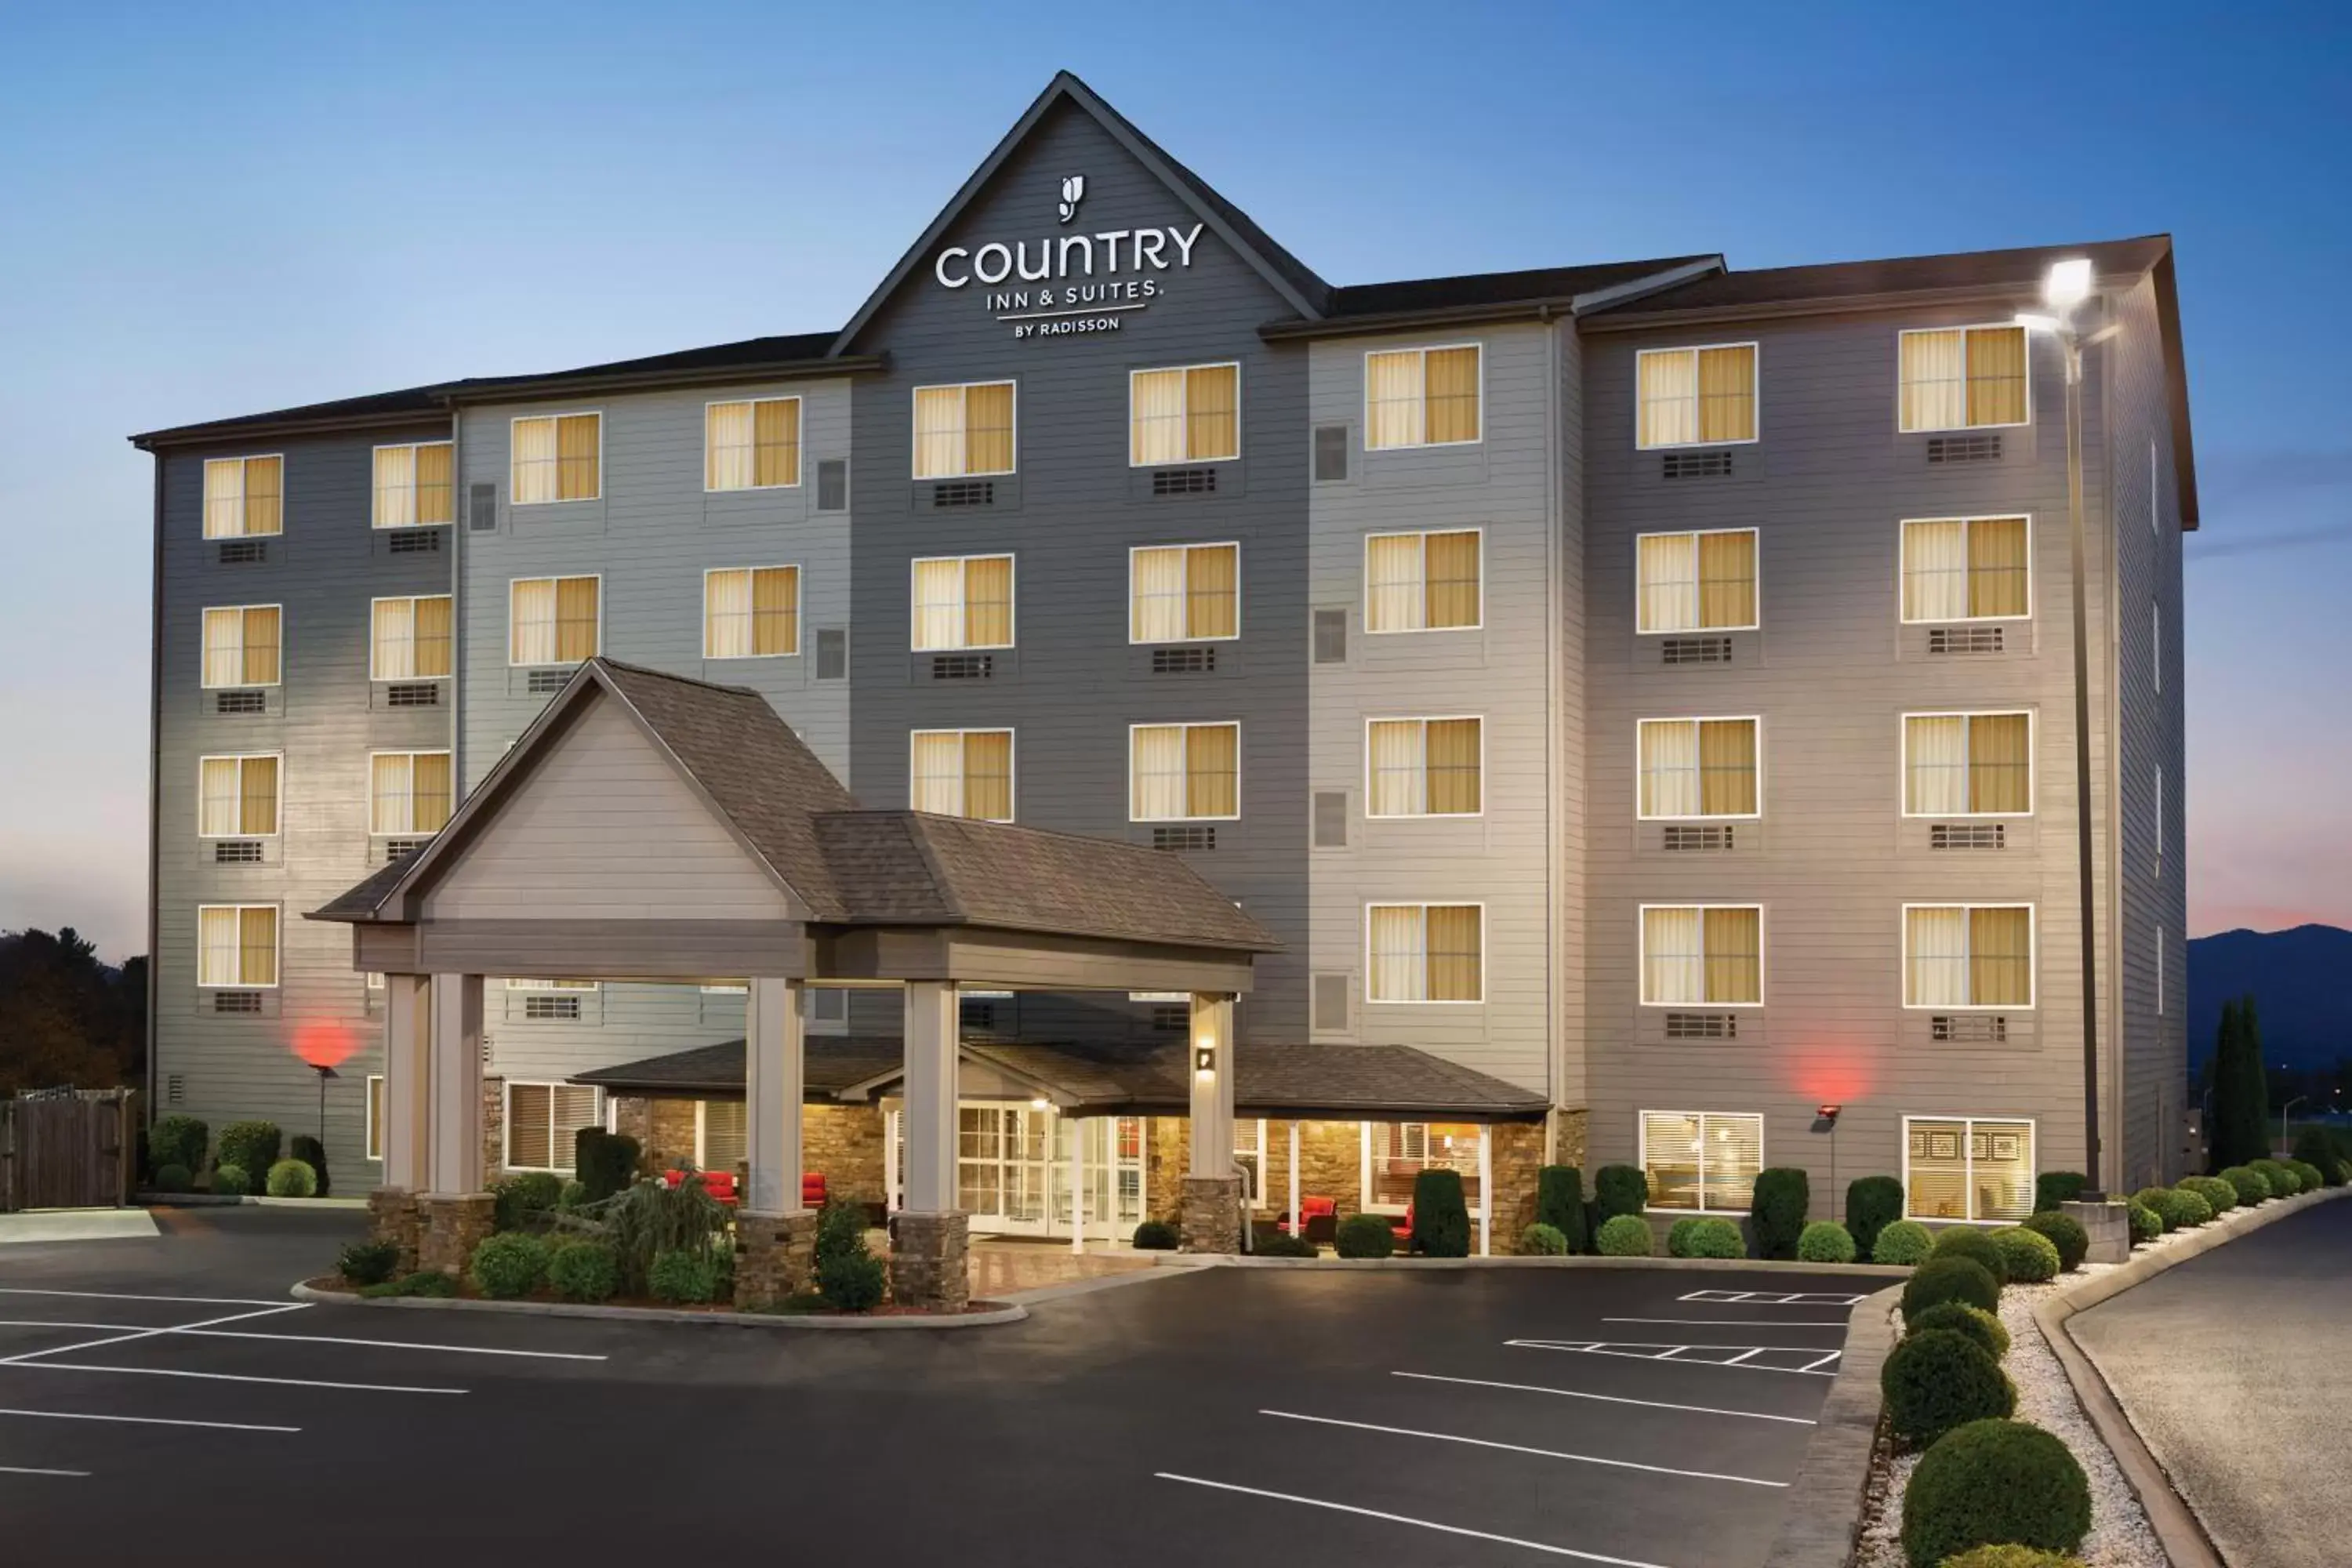 Facade/entrance, Property Building in Country Inn & Suites by Radisson, Wytheville, VA